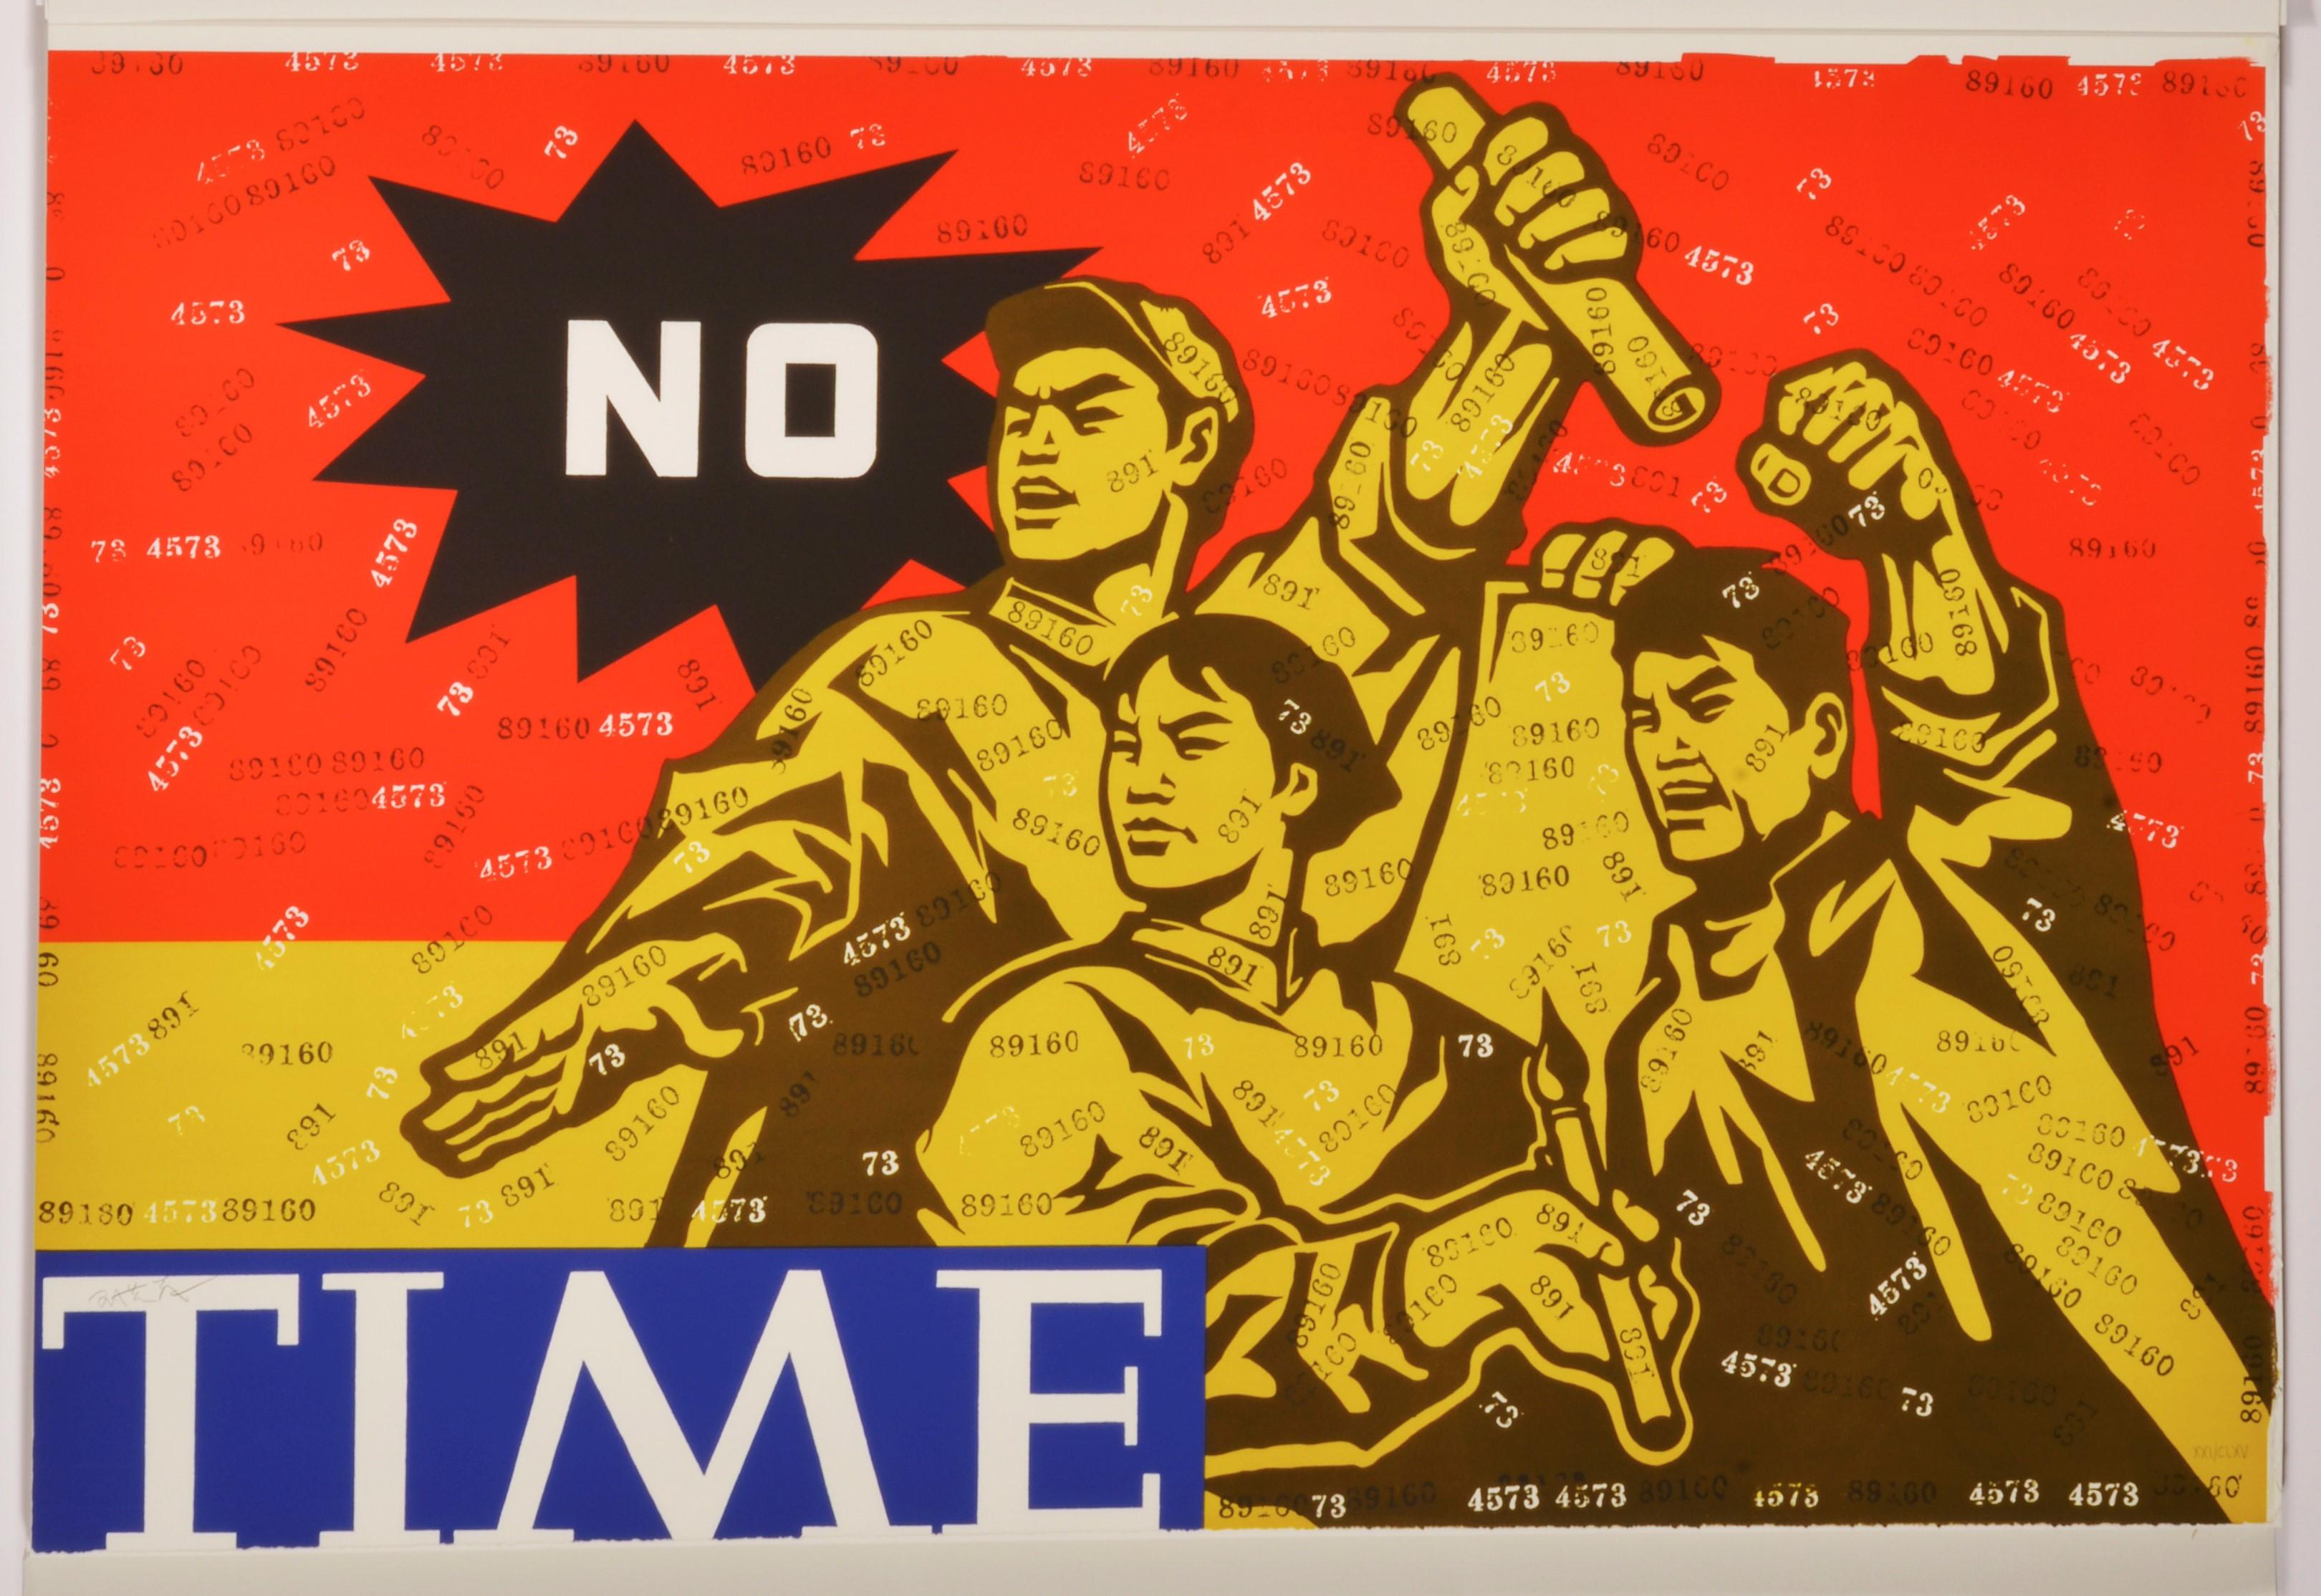 Wang Guangyi Figurative Print - No Time - Contemporary, 21st Century, Lithograph, Chinese, Chinese Culture